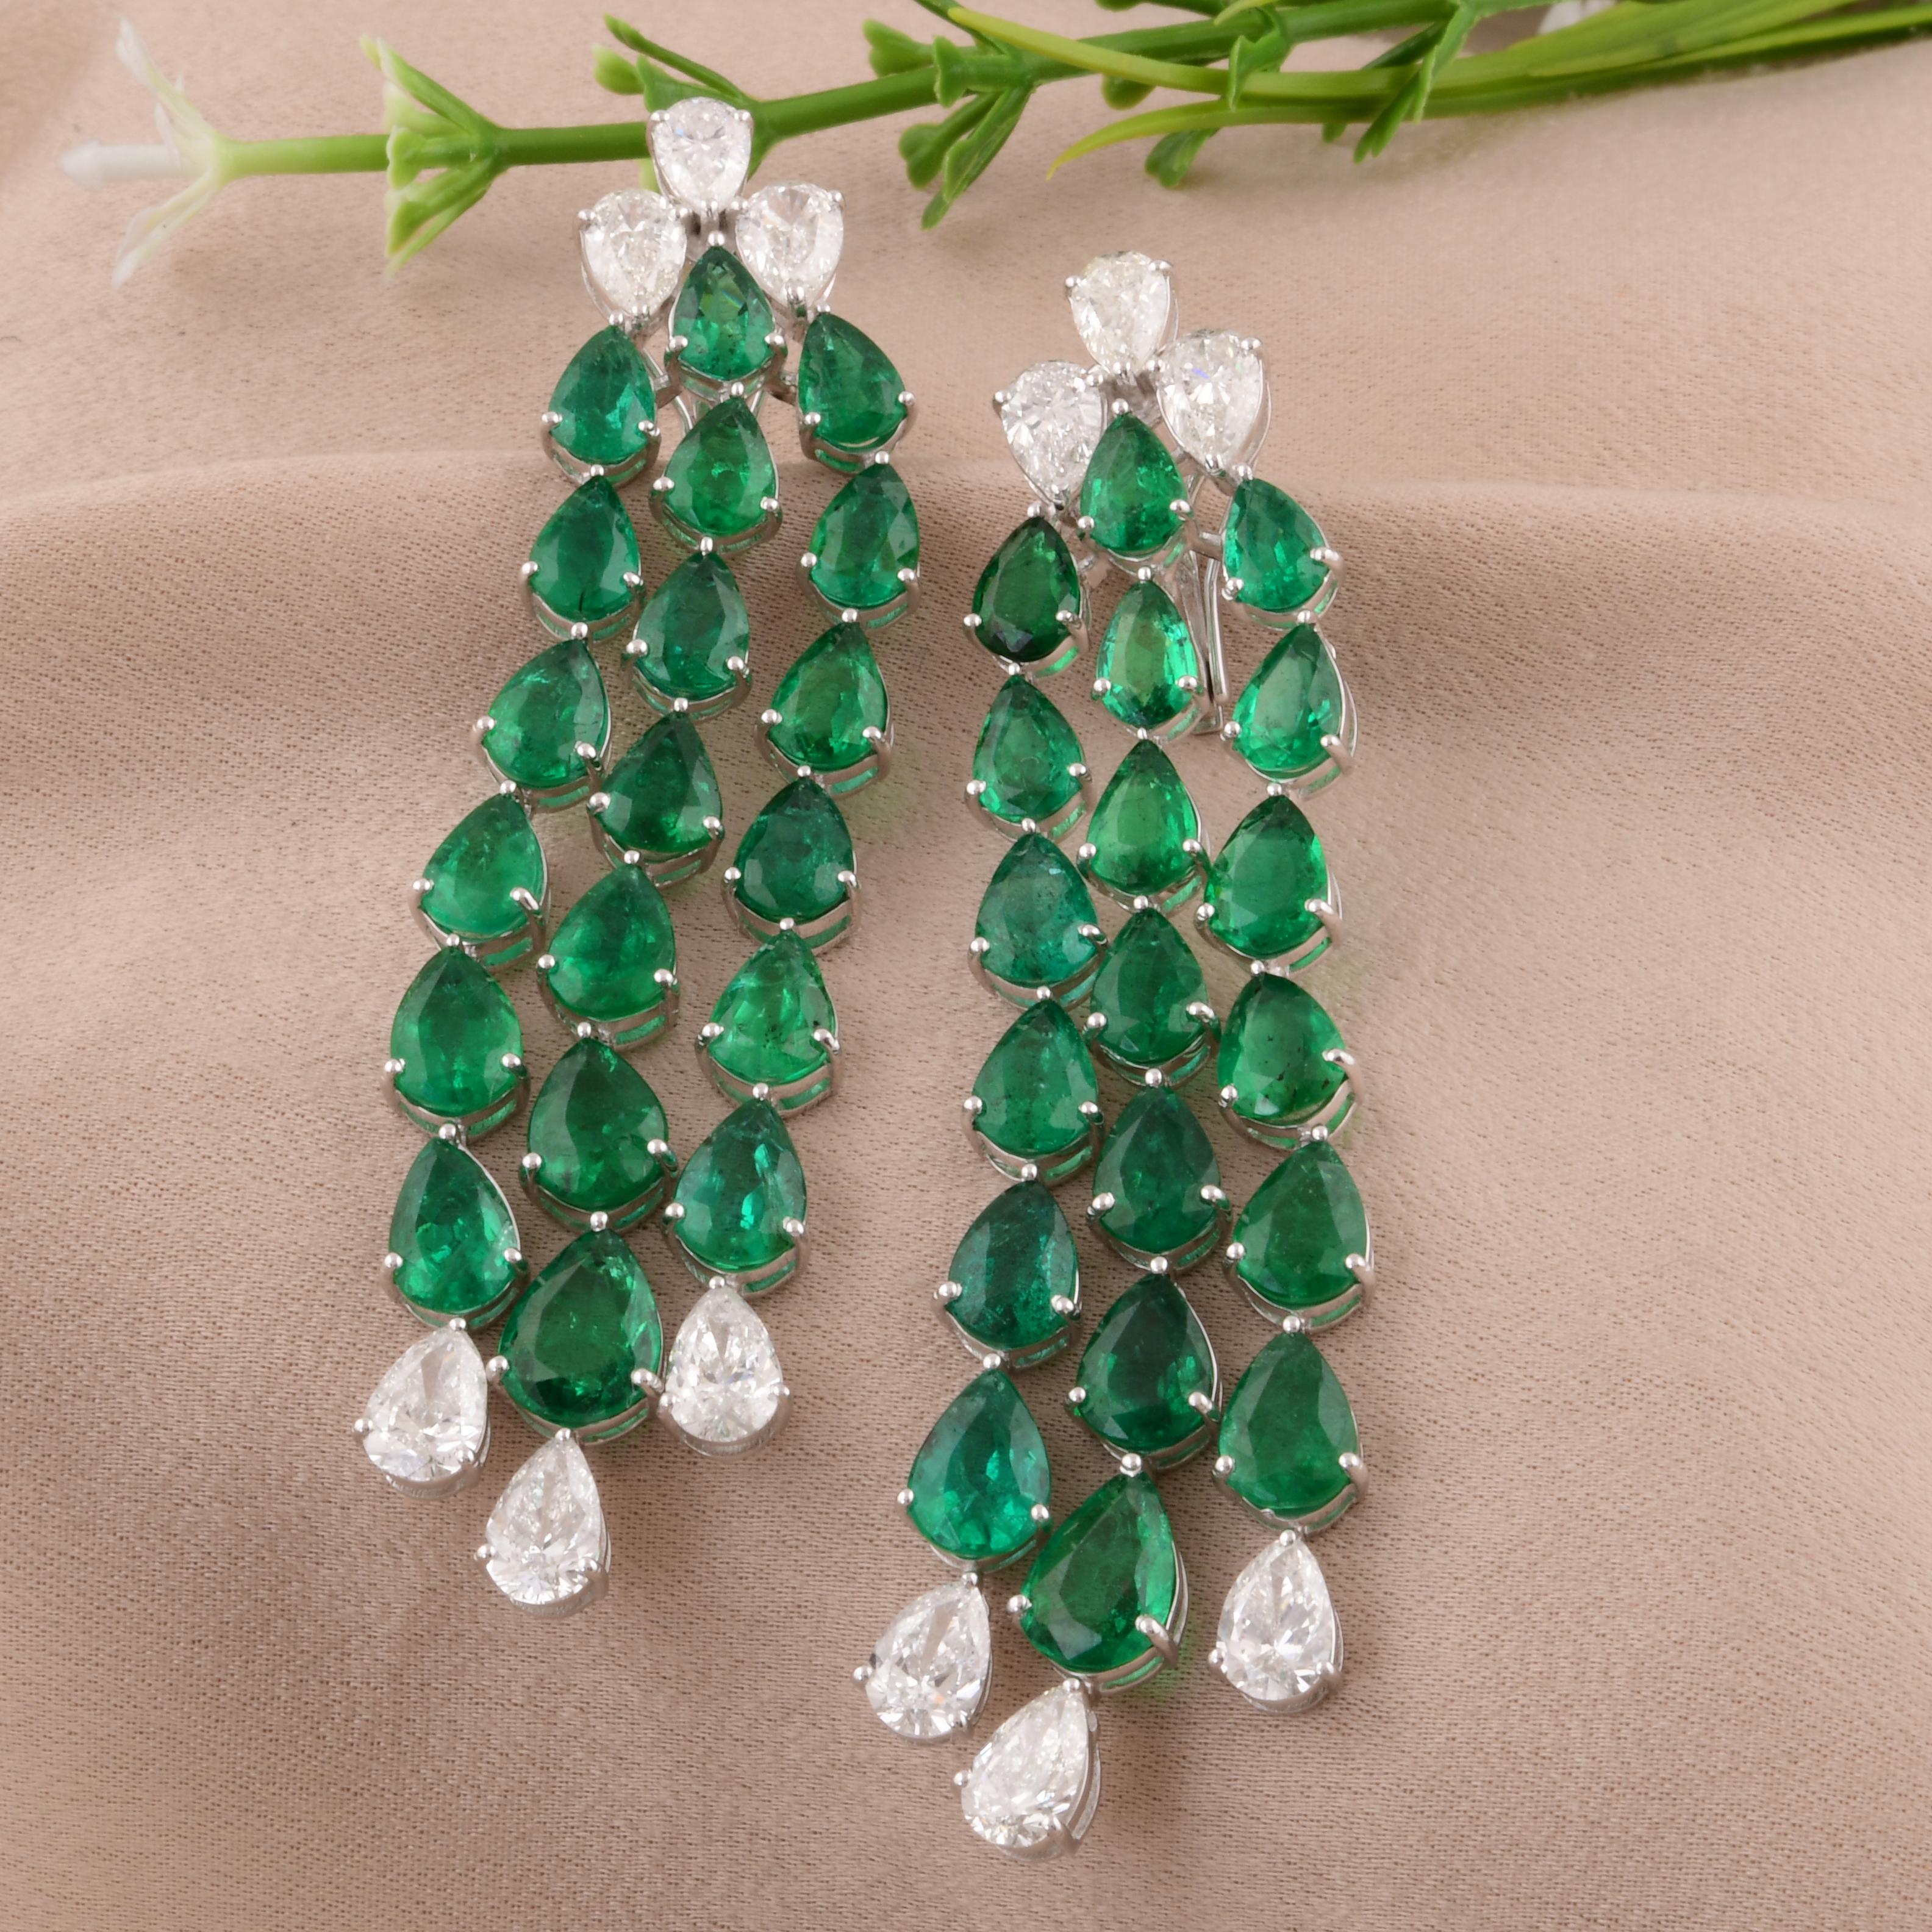 Elevate your style to the pinnacle of sophistication with these breathtaking Pear Zambian Emerald Gemstone Chandelier Earrings, adorned with shimmering Diamonds and meticulously crafted in lustrous 14 Karat White Gold. This stunning pair of earrings